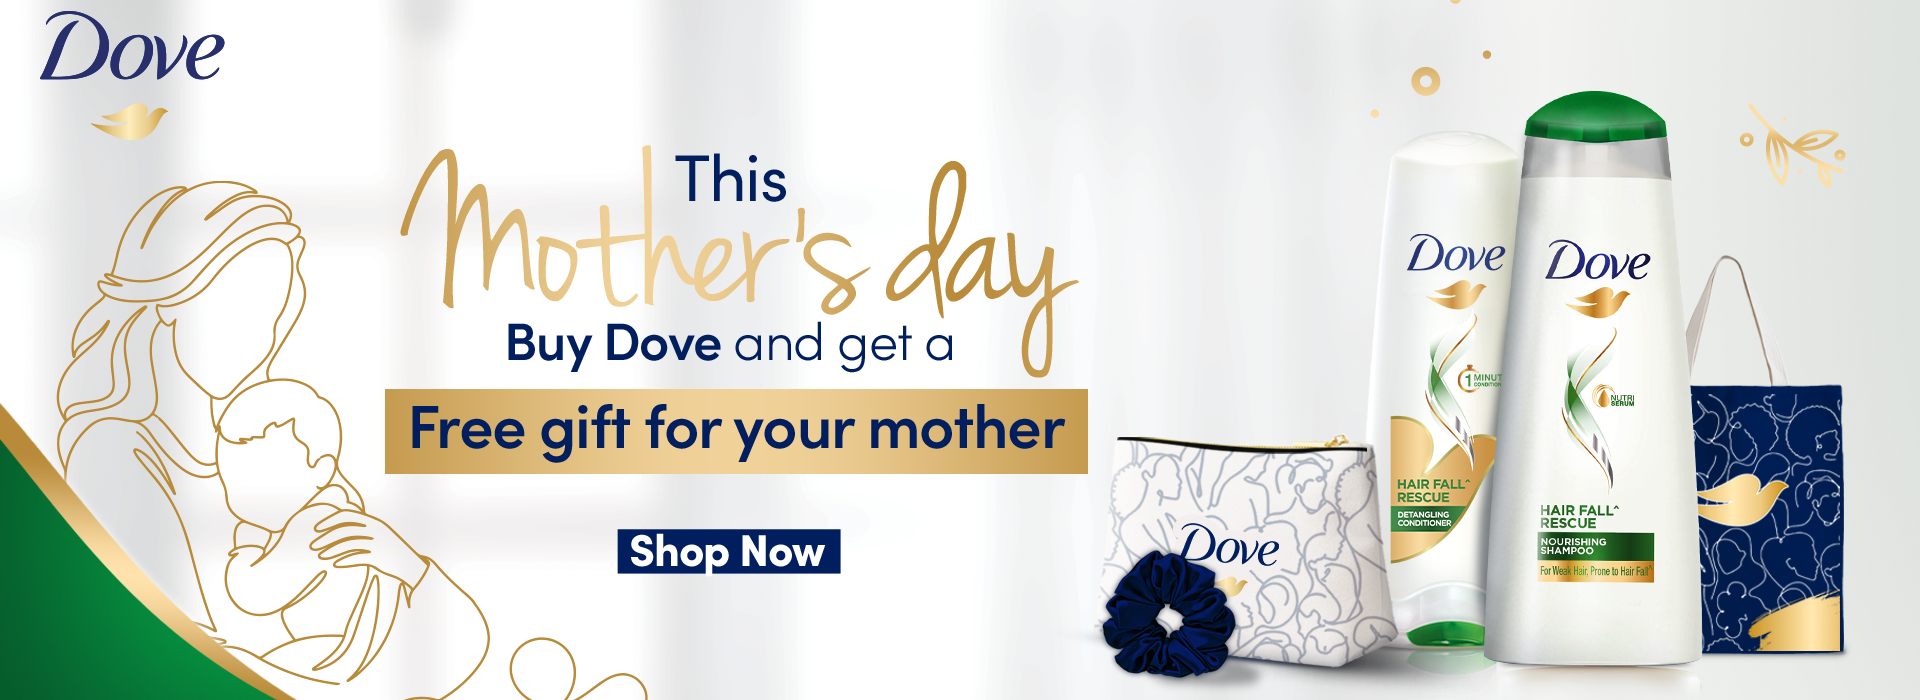 dove mothers day 2-1.png__PID:83c90ba1-a813-4c24-9ba4-67ff185dfae4